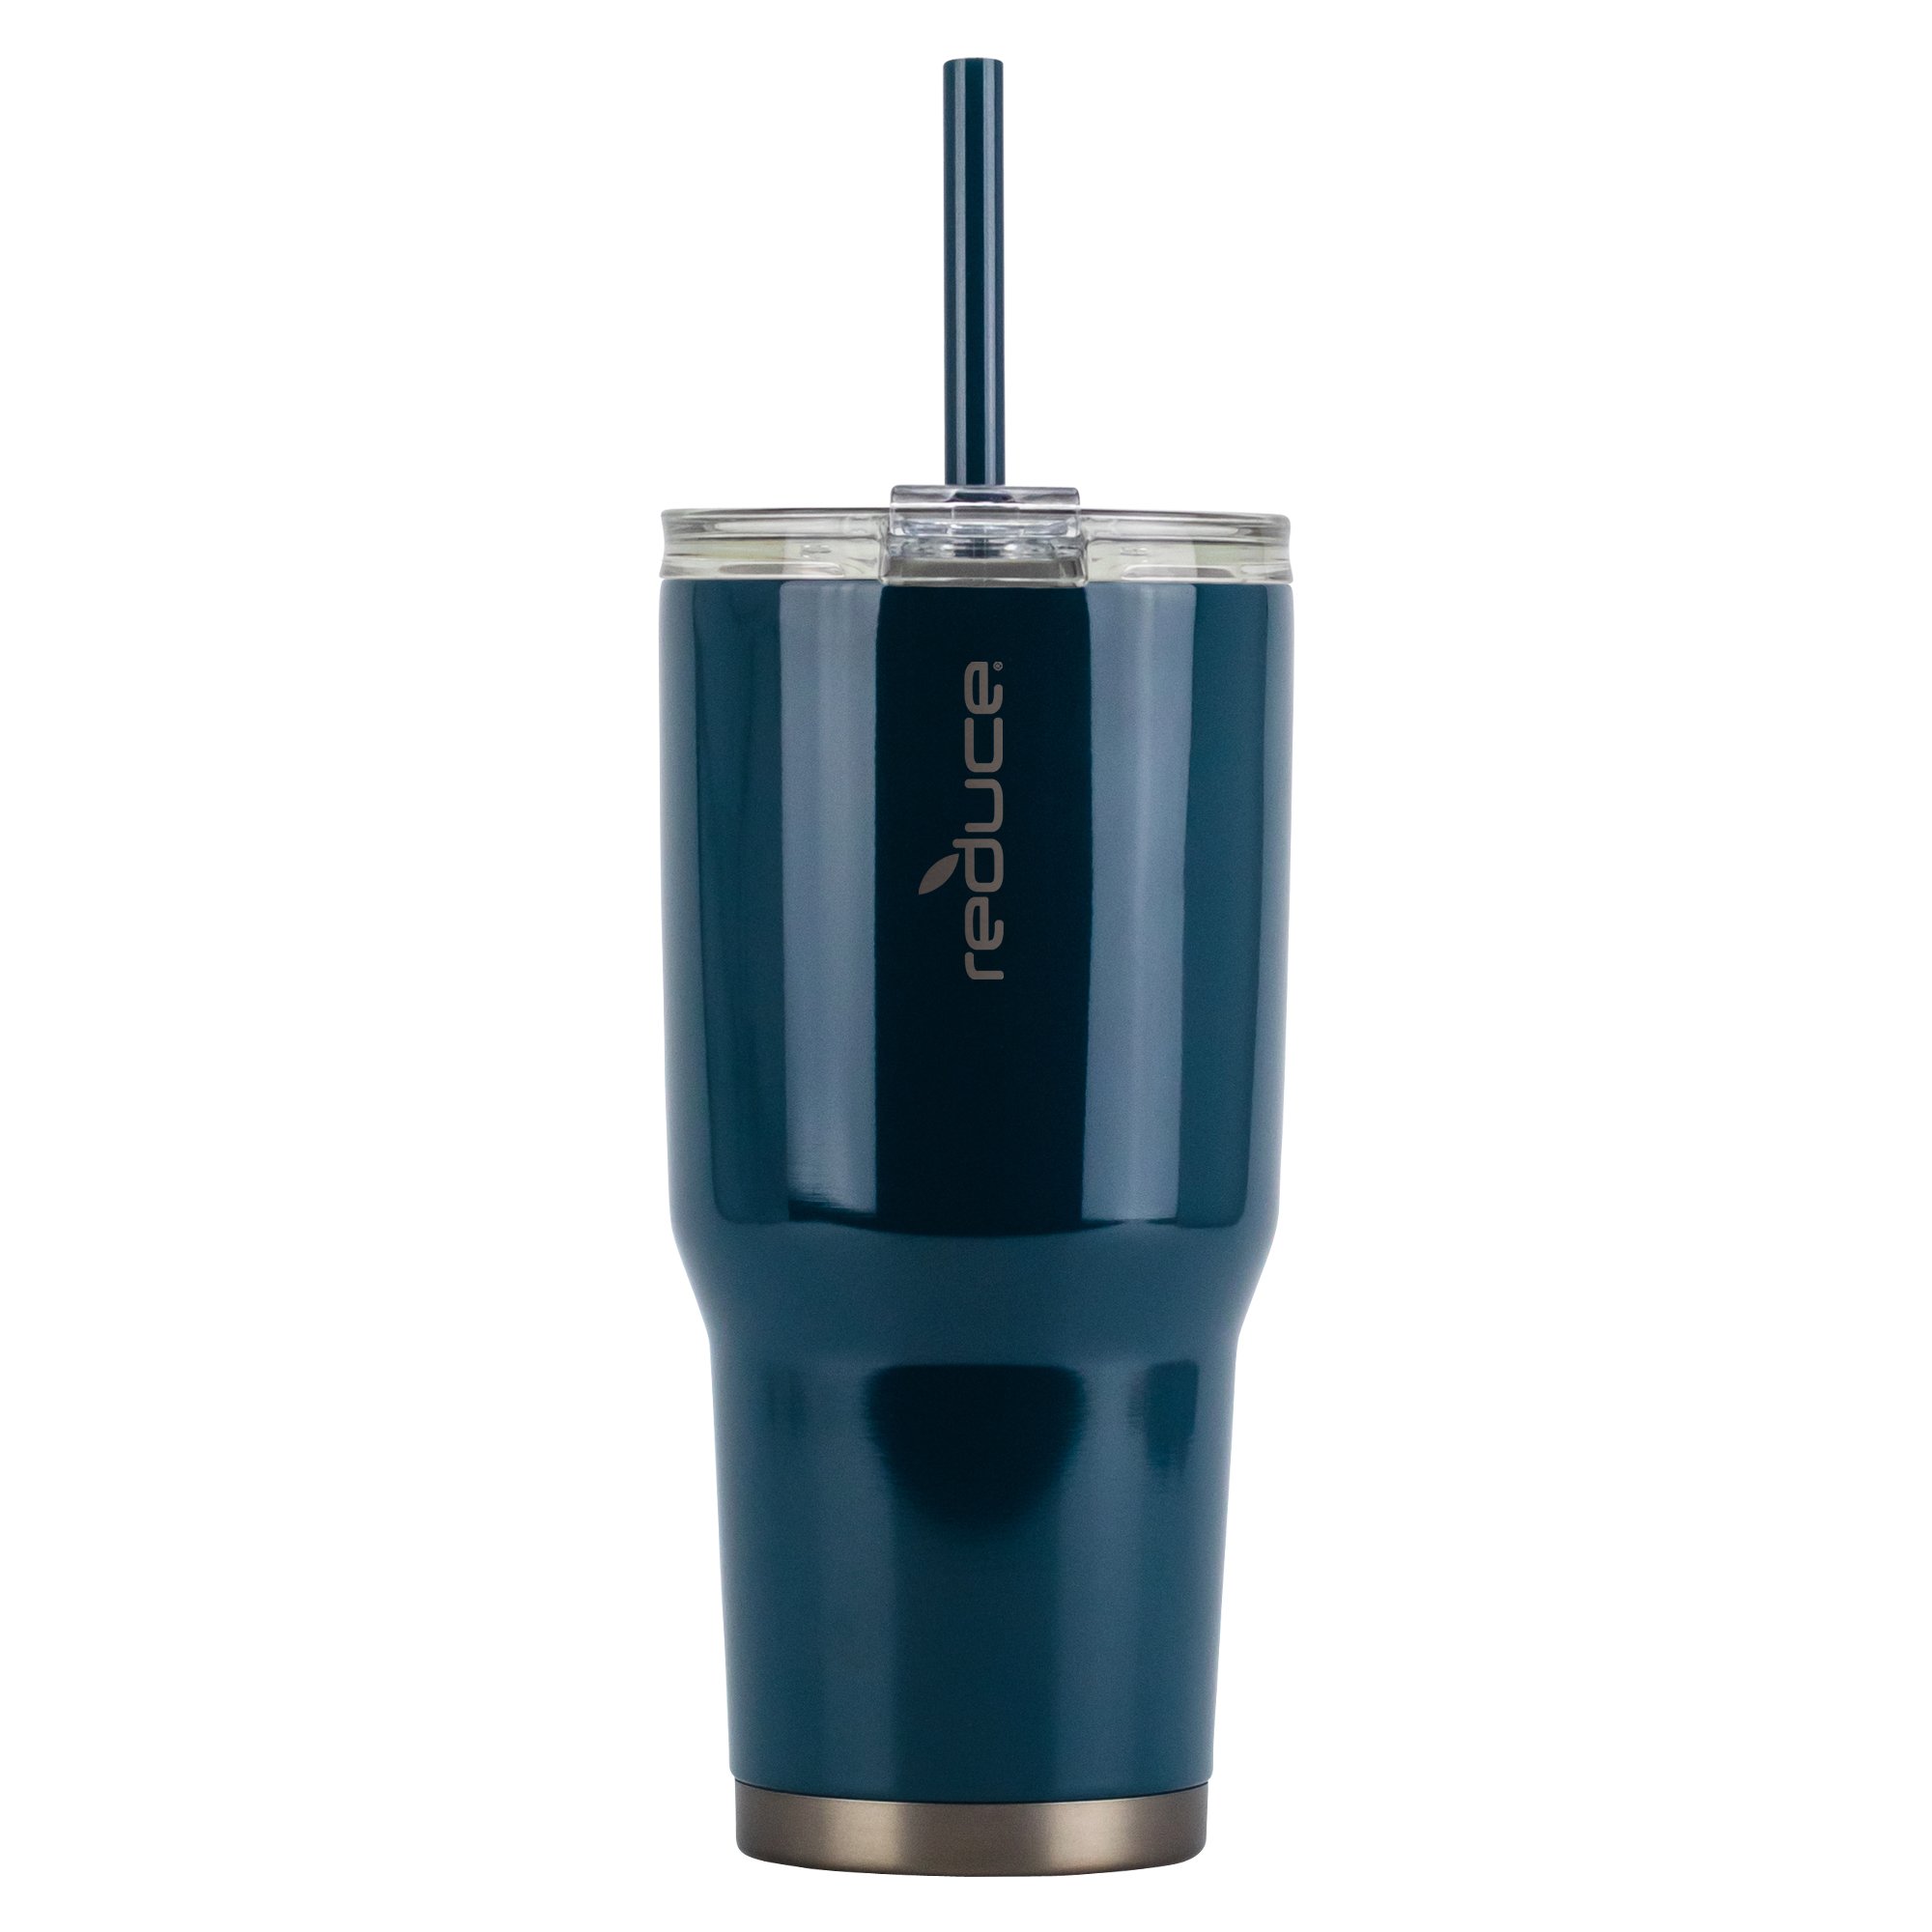 REDUCE Cold1 24 oz Tumbler with Lid and Straw - Dual-Wall  Vacuum Insulated Stainless Steel Tumbler - Keeps Drinks Cold up to 24 Hours  - Inner Ounce Markings to Track